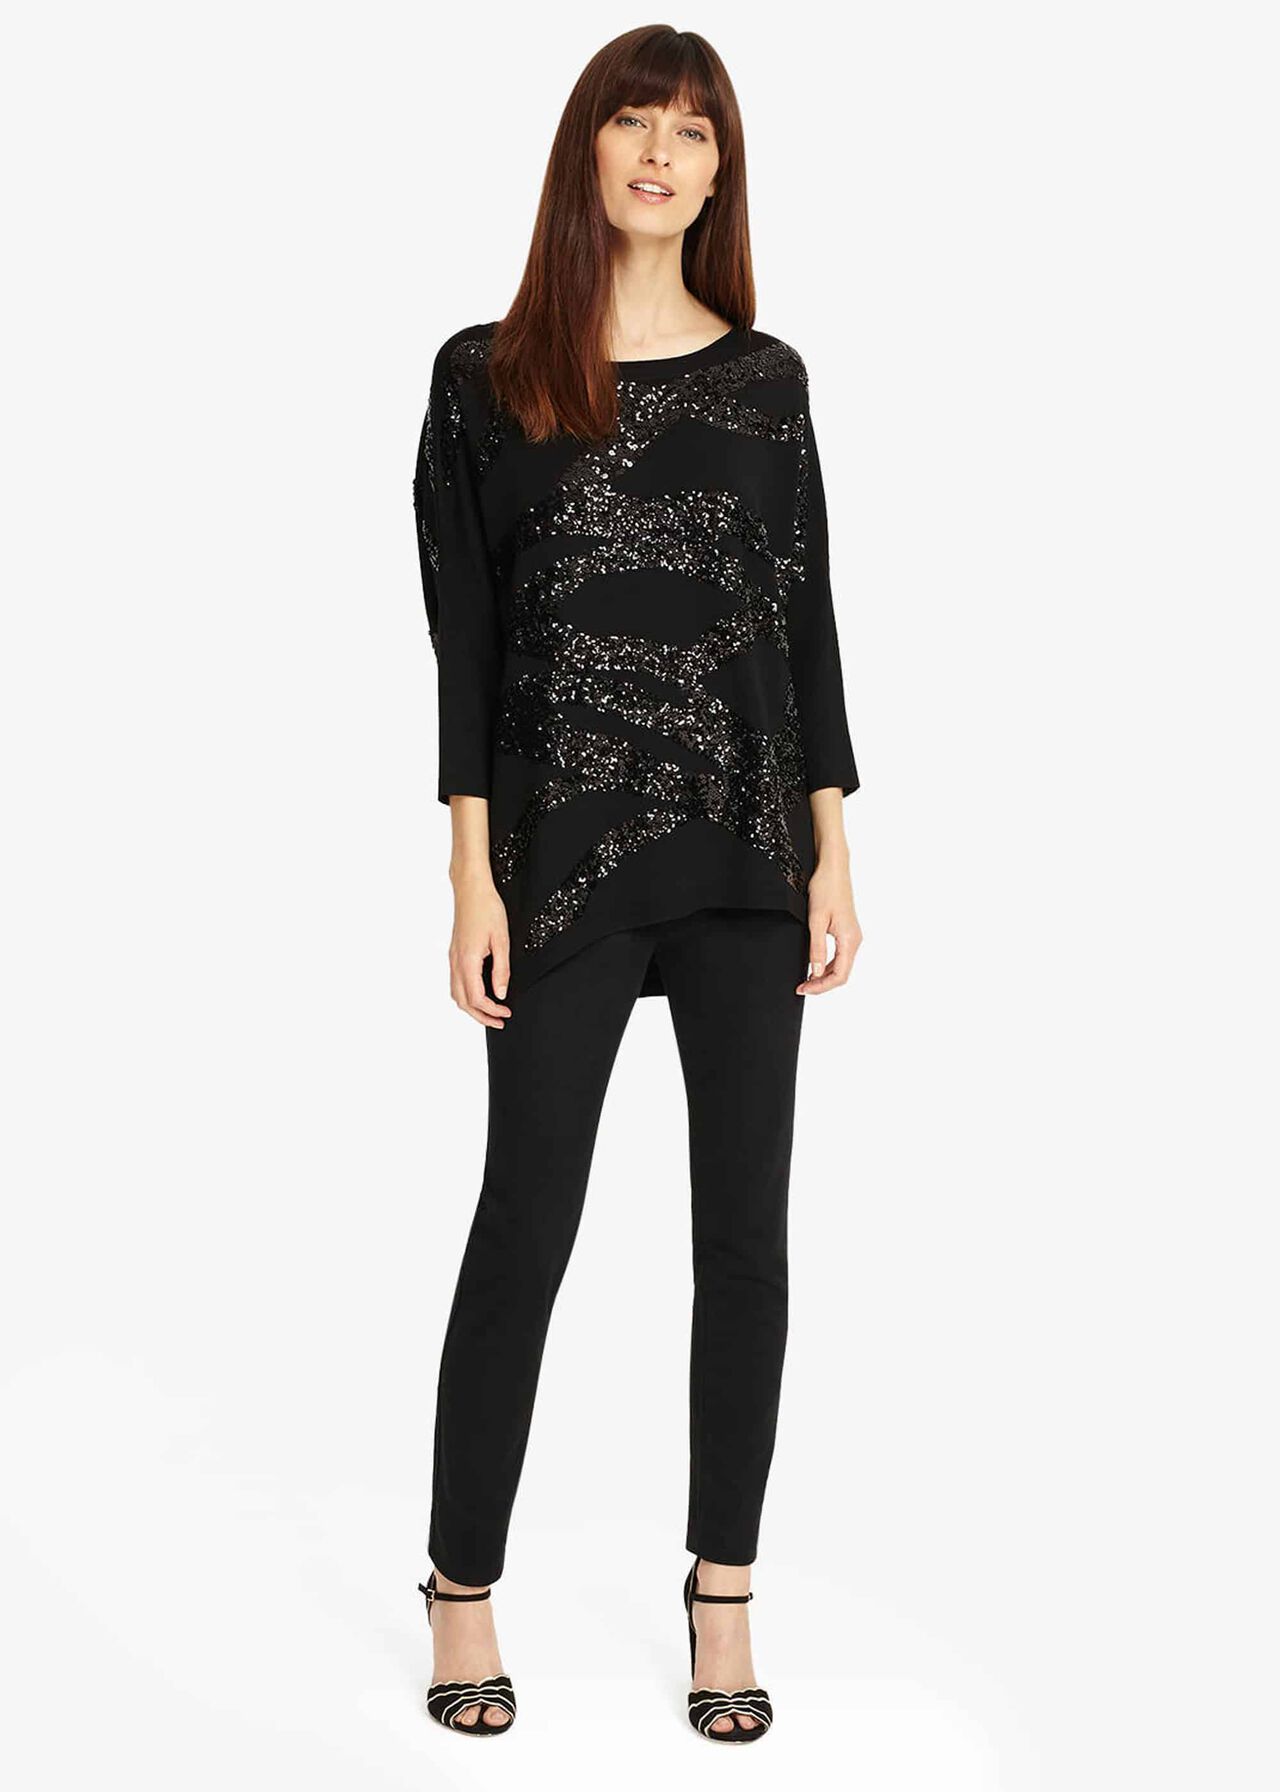 Rachelle Rope Sequin Knitted Jumper